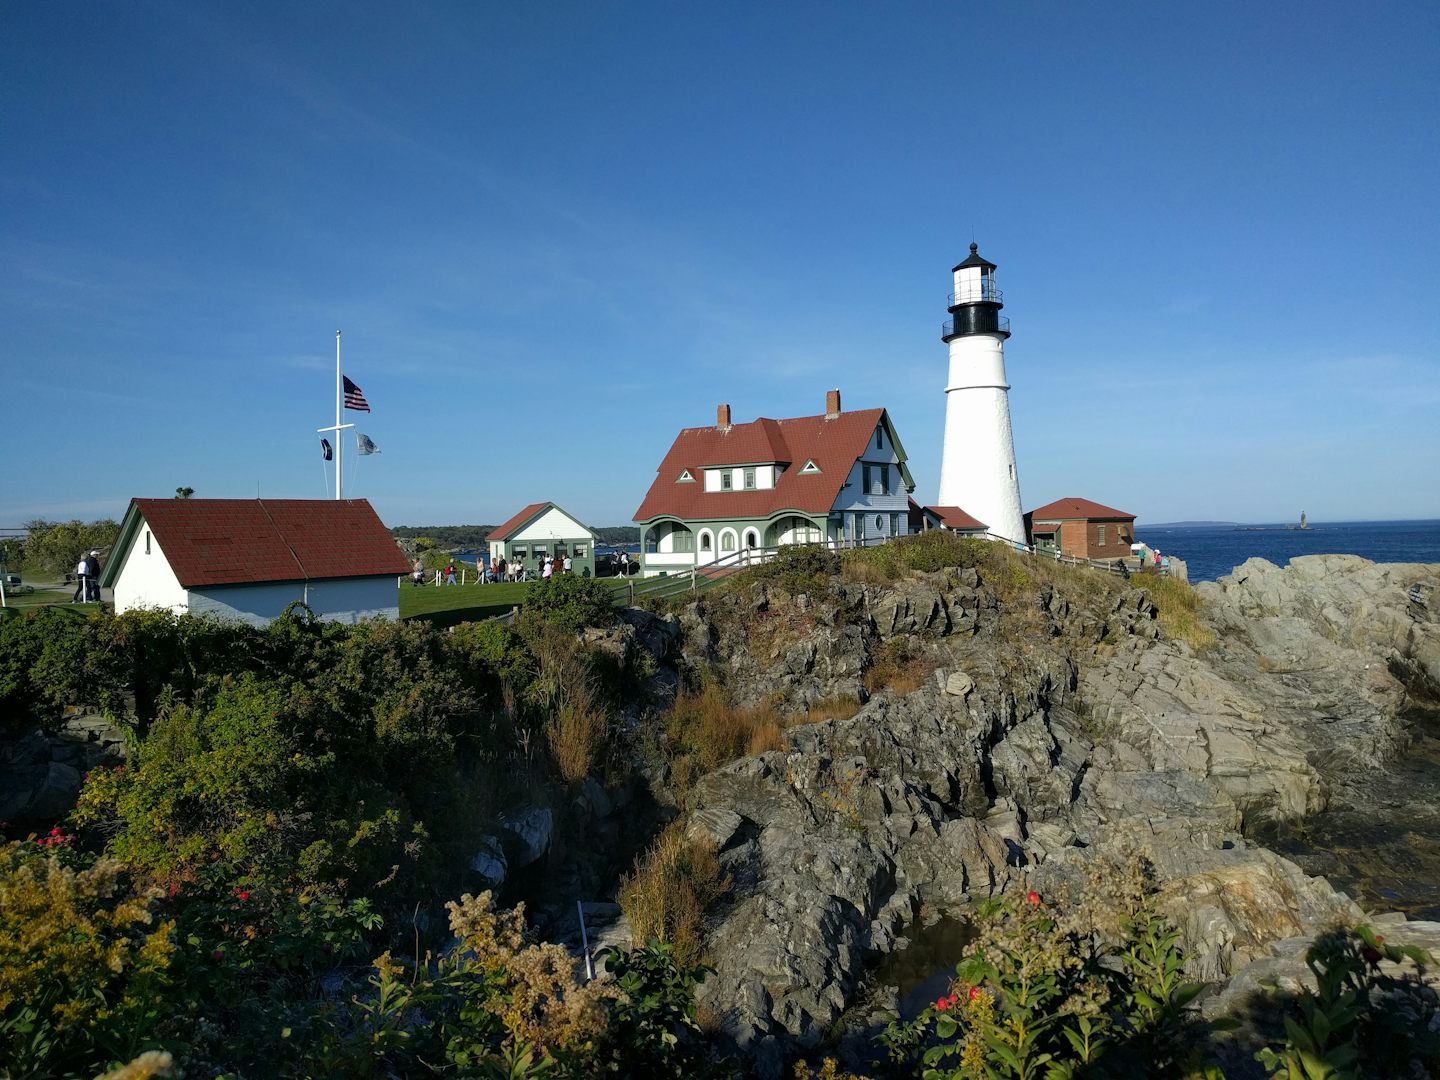 Lighthouses of Maine